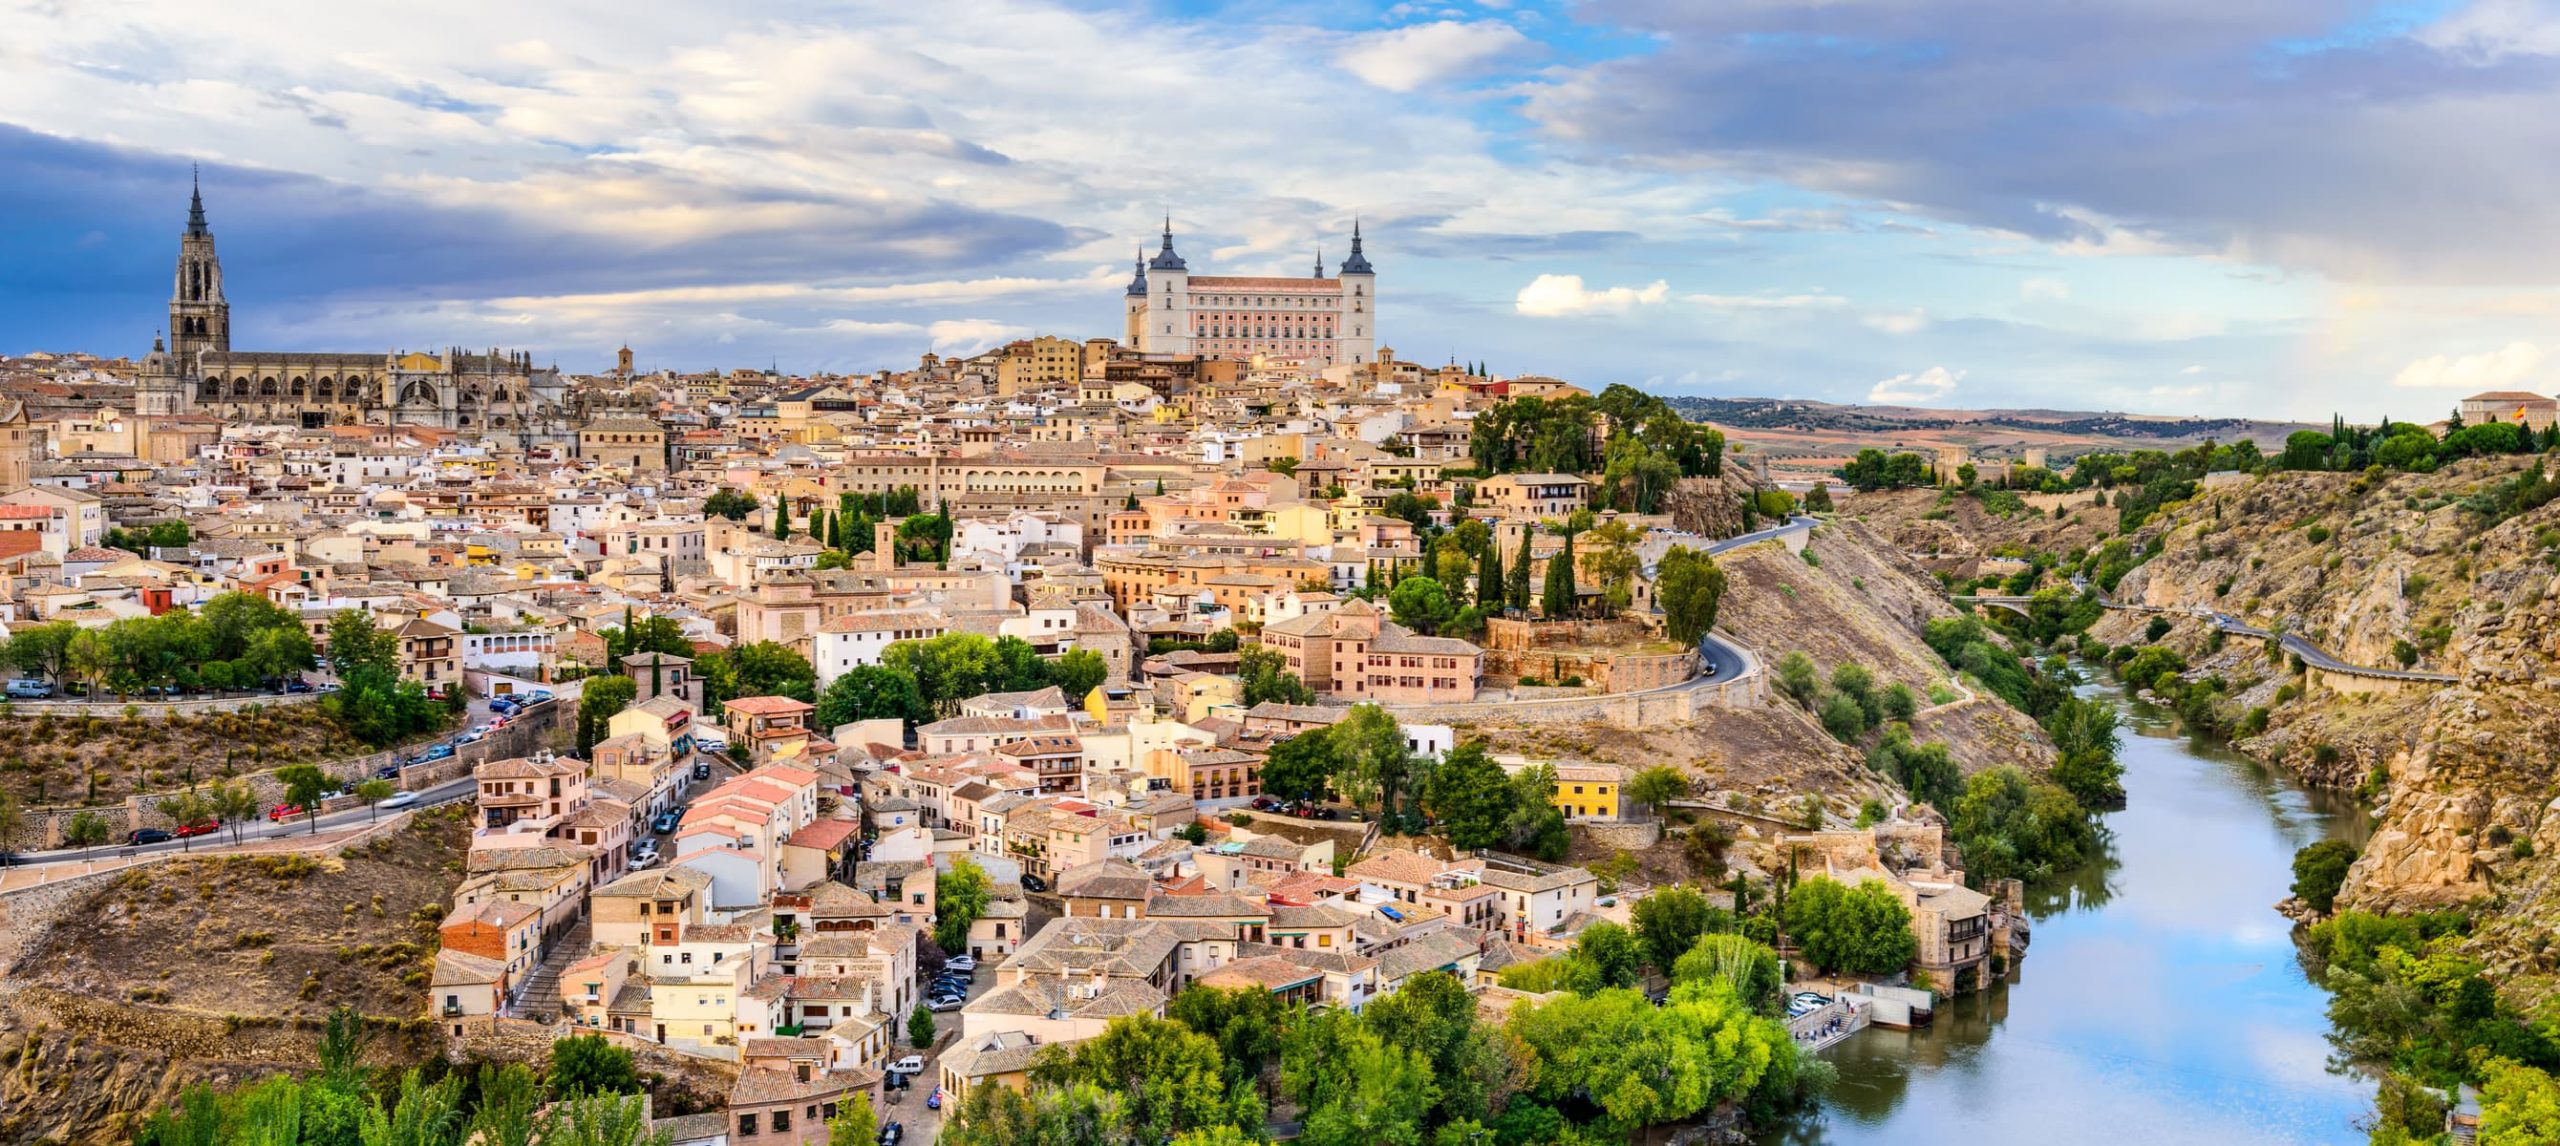 9 Amazing Things To Do In Toledo, Spain